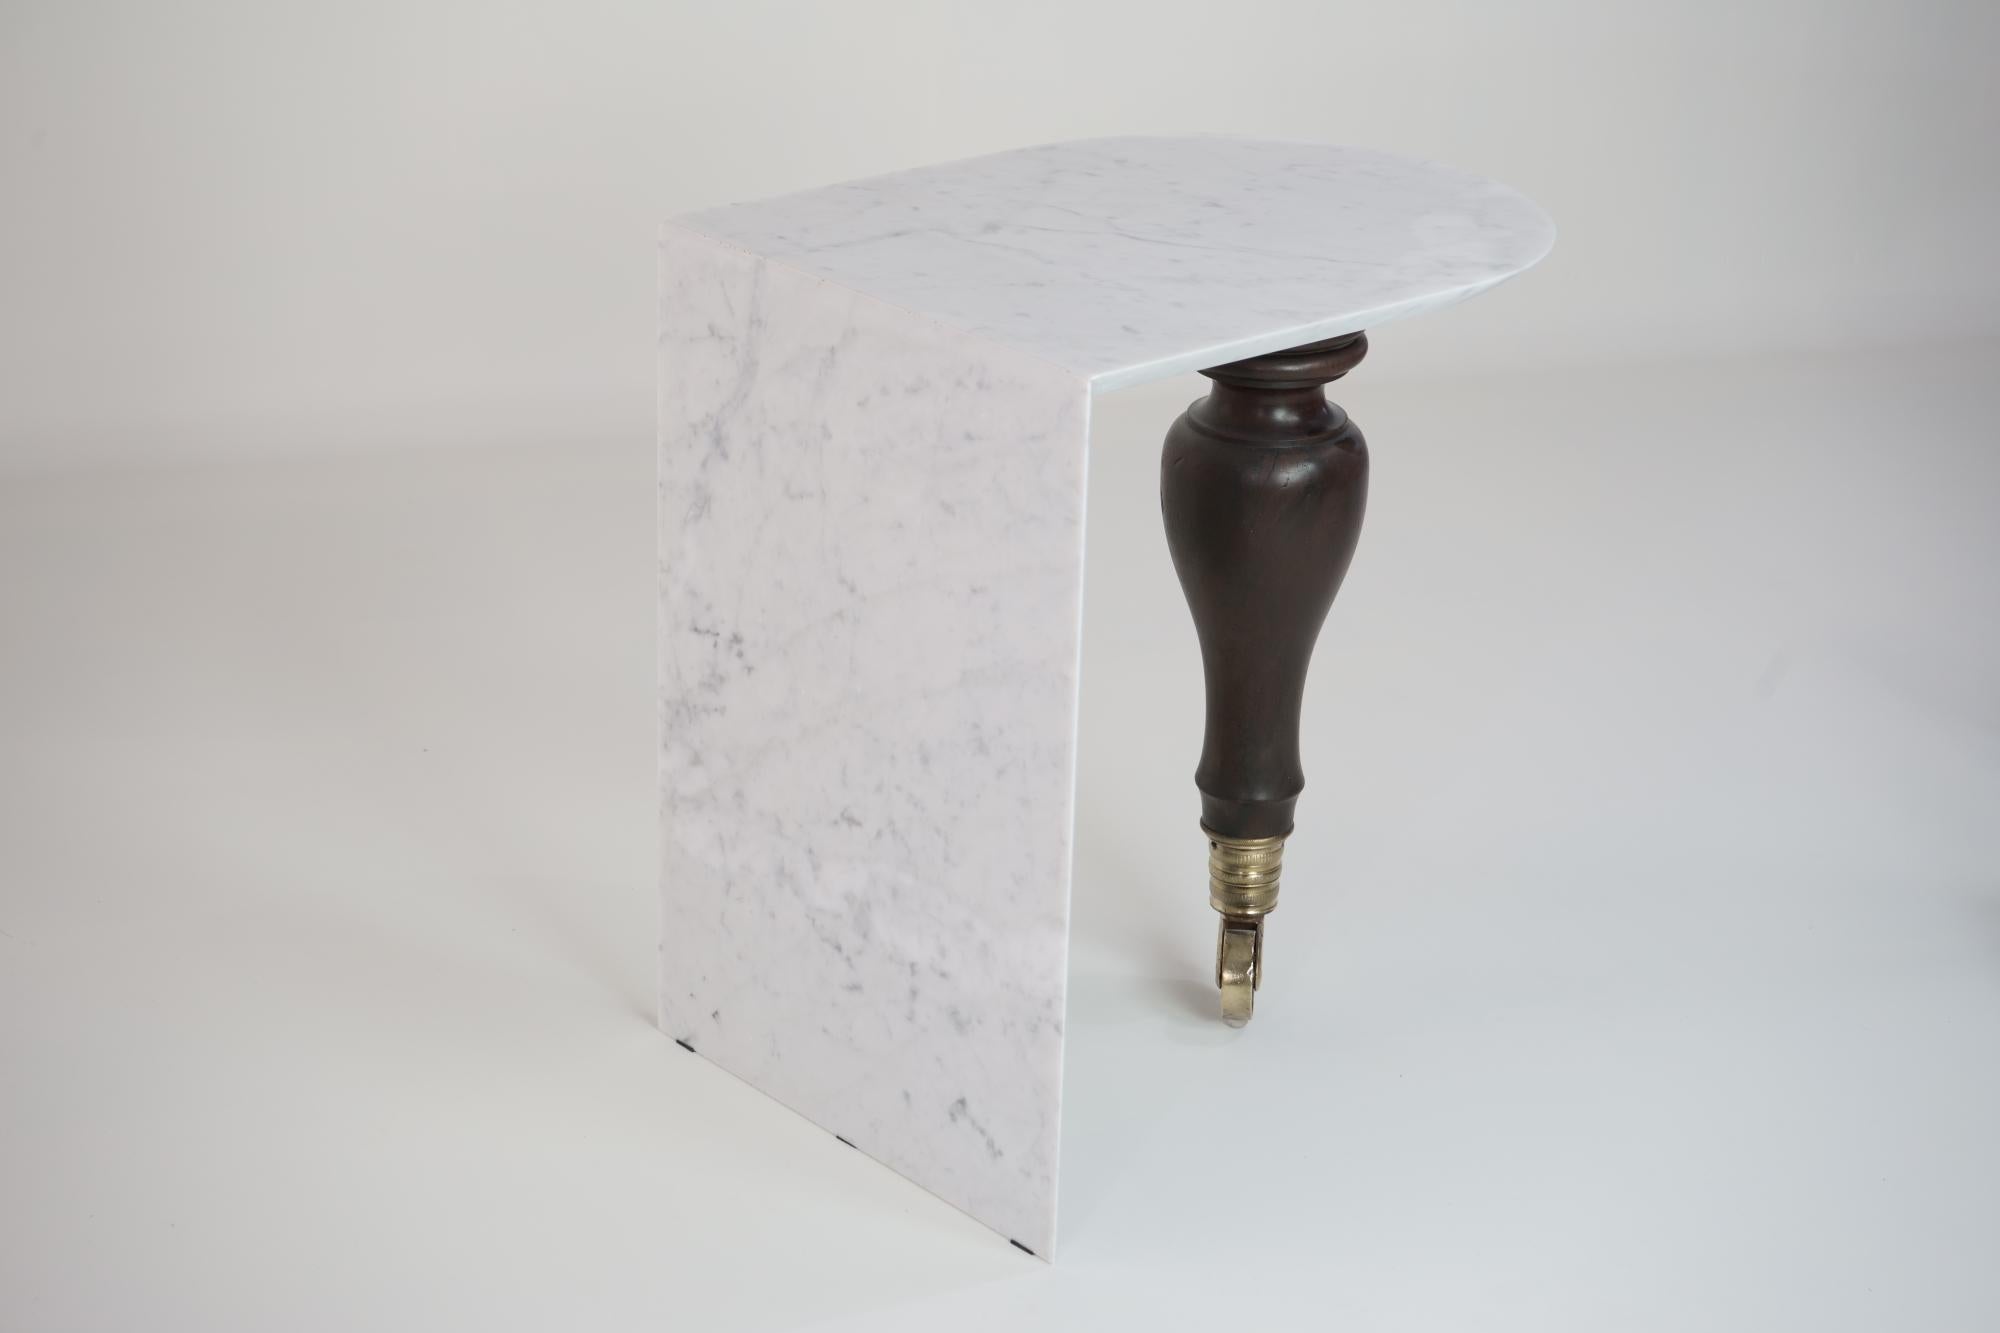 Woodwork Pianoforte - Carrara Marble Side Table By DFdesignlab Handmade in Italy For Sale